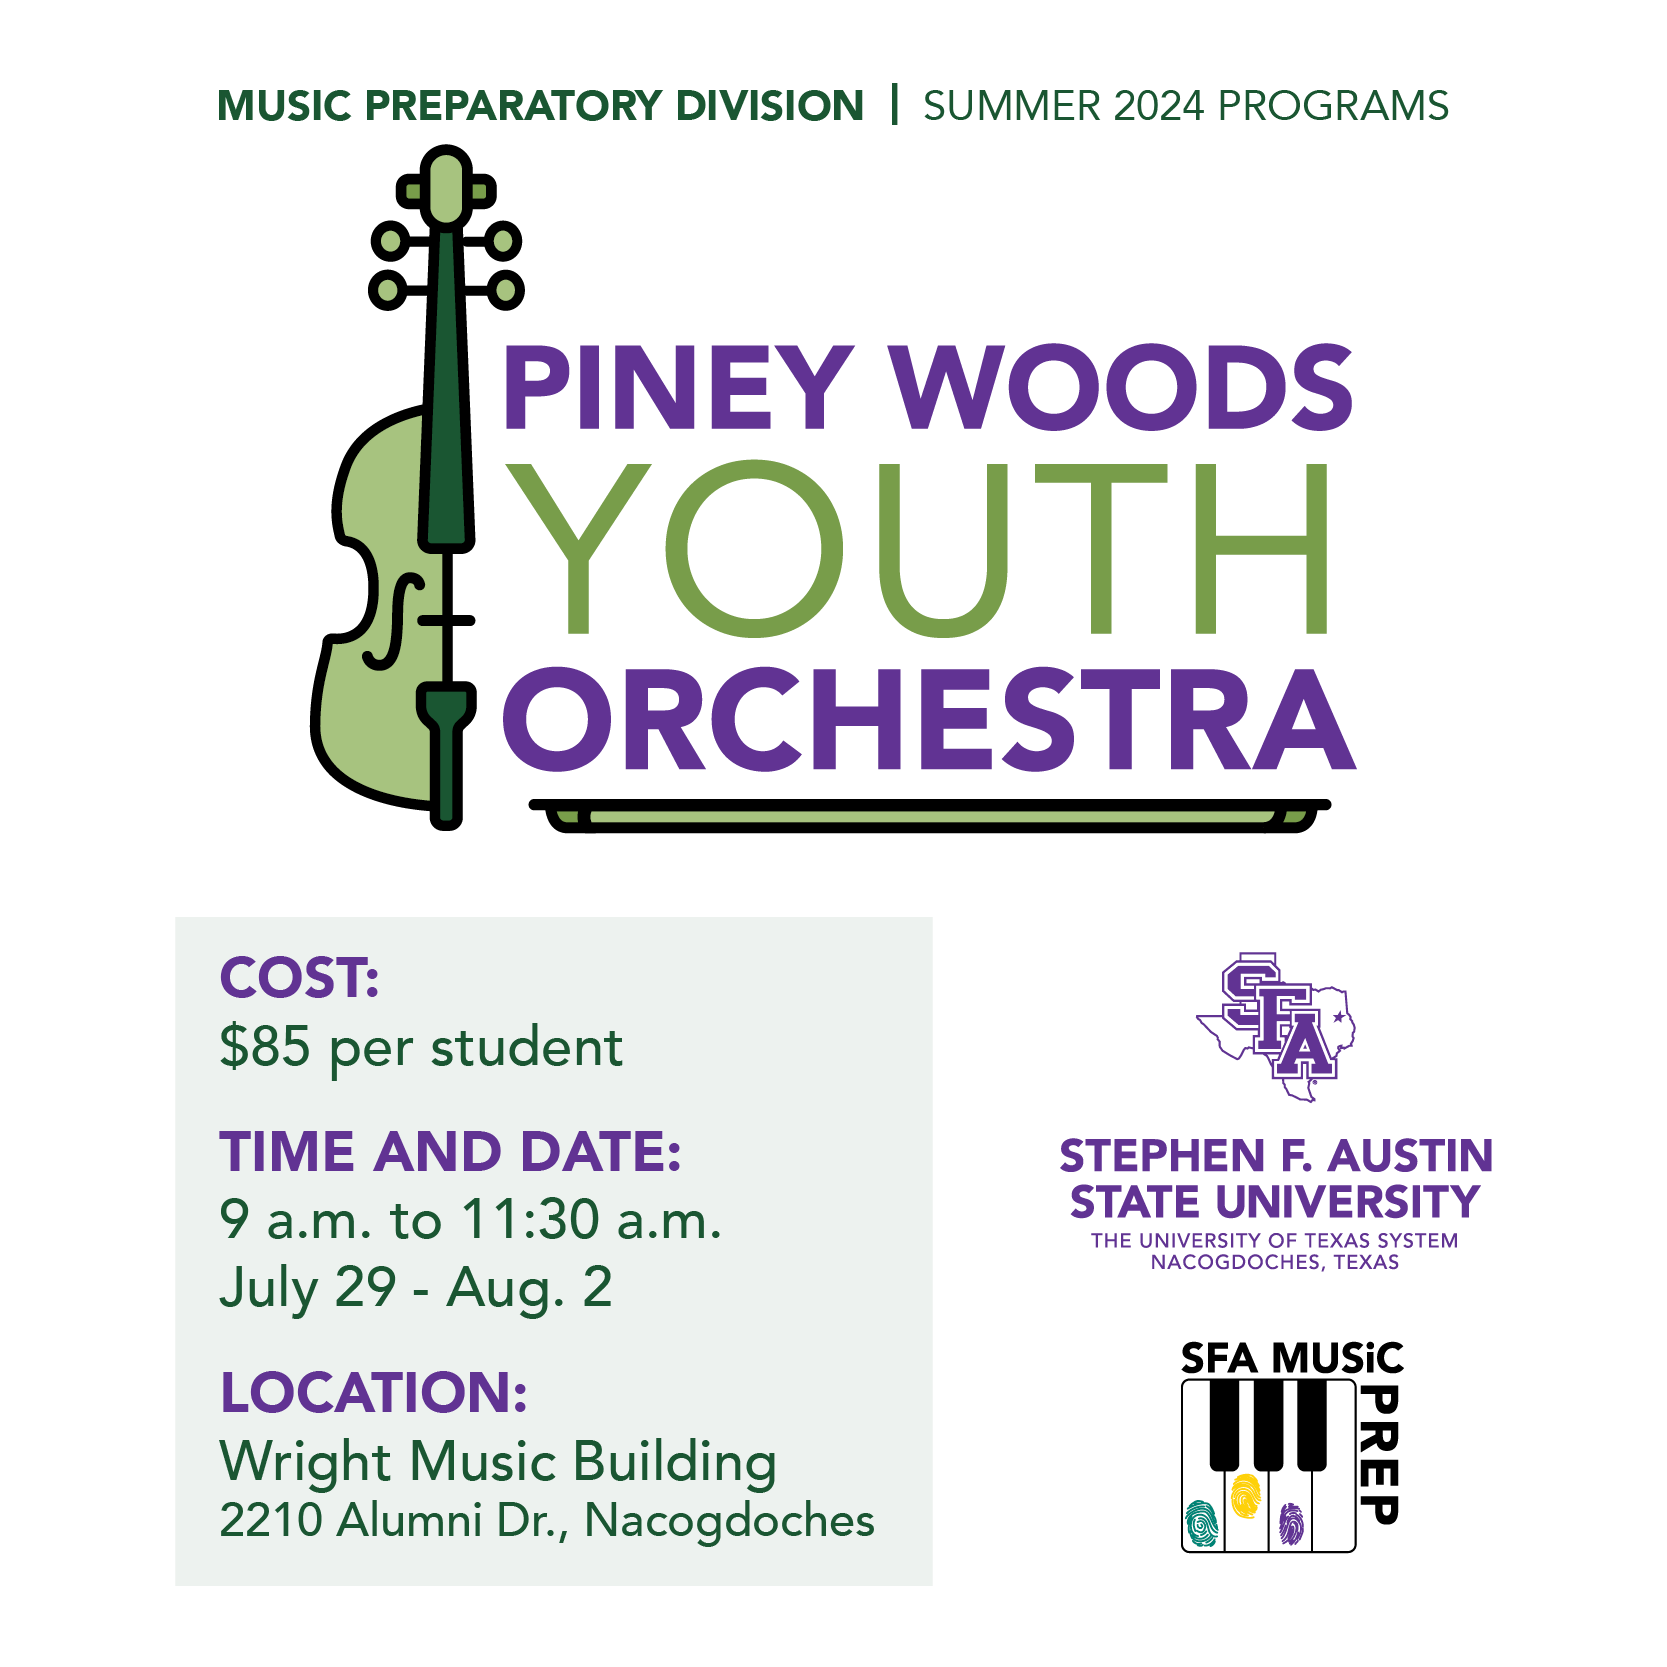 Piney Woods Youth Orchestra Camp